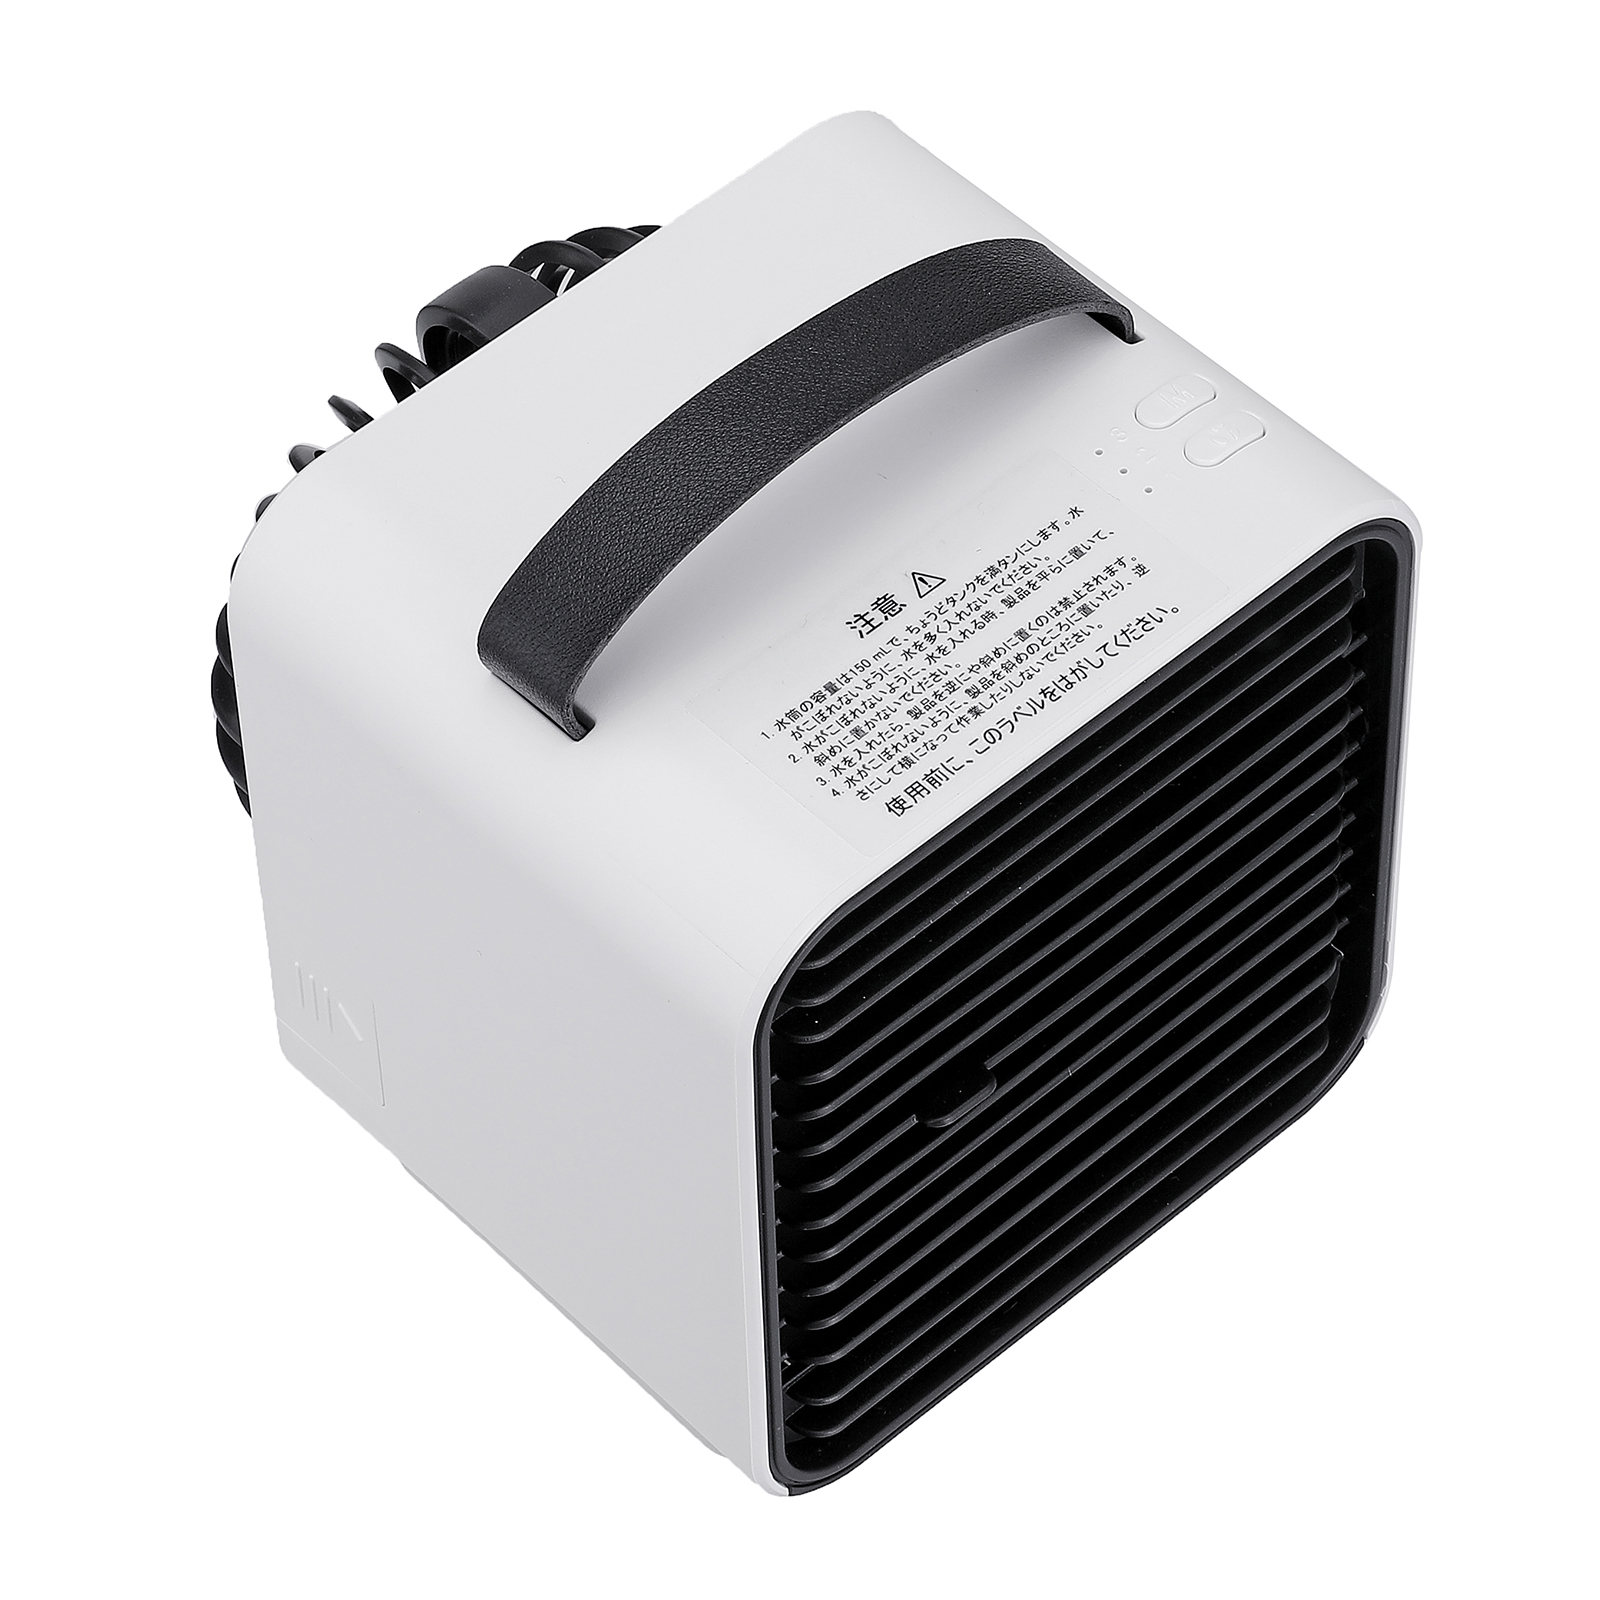 4-in-1-Mini-Air-Cooler-Portable-USB-Air-Conditioning-2000mAh-Cooling-Fan-3-Wind-Speed-Adjustment-Nig-1885394-8